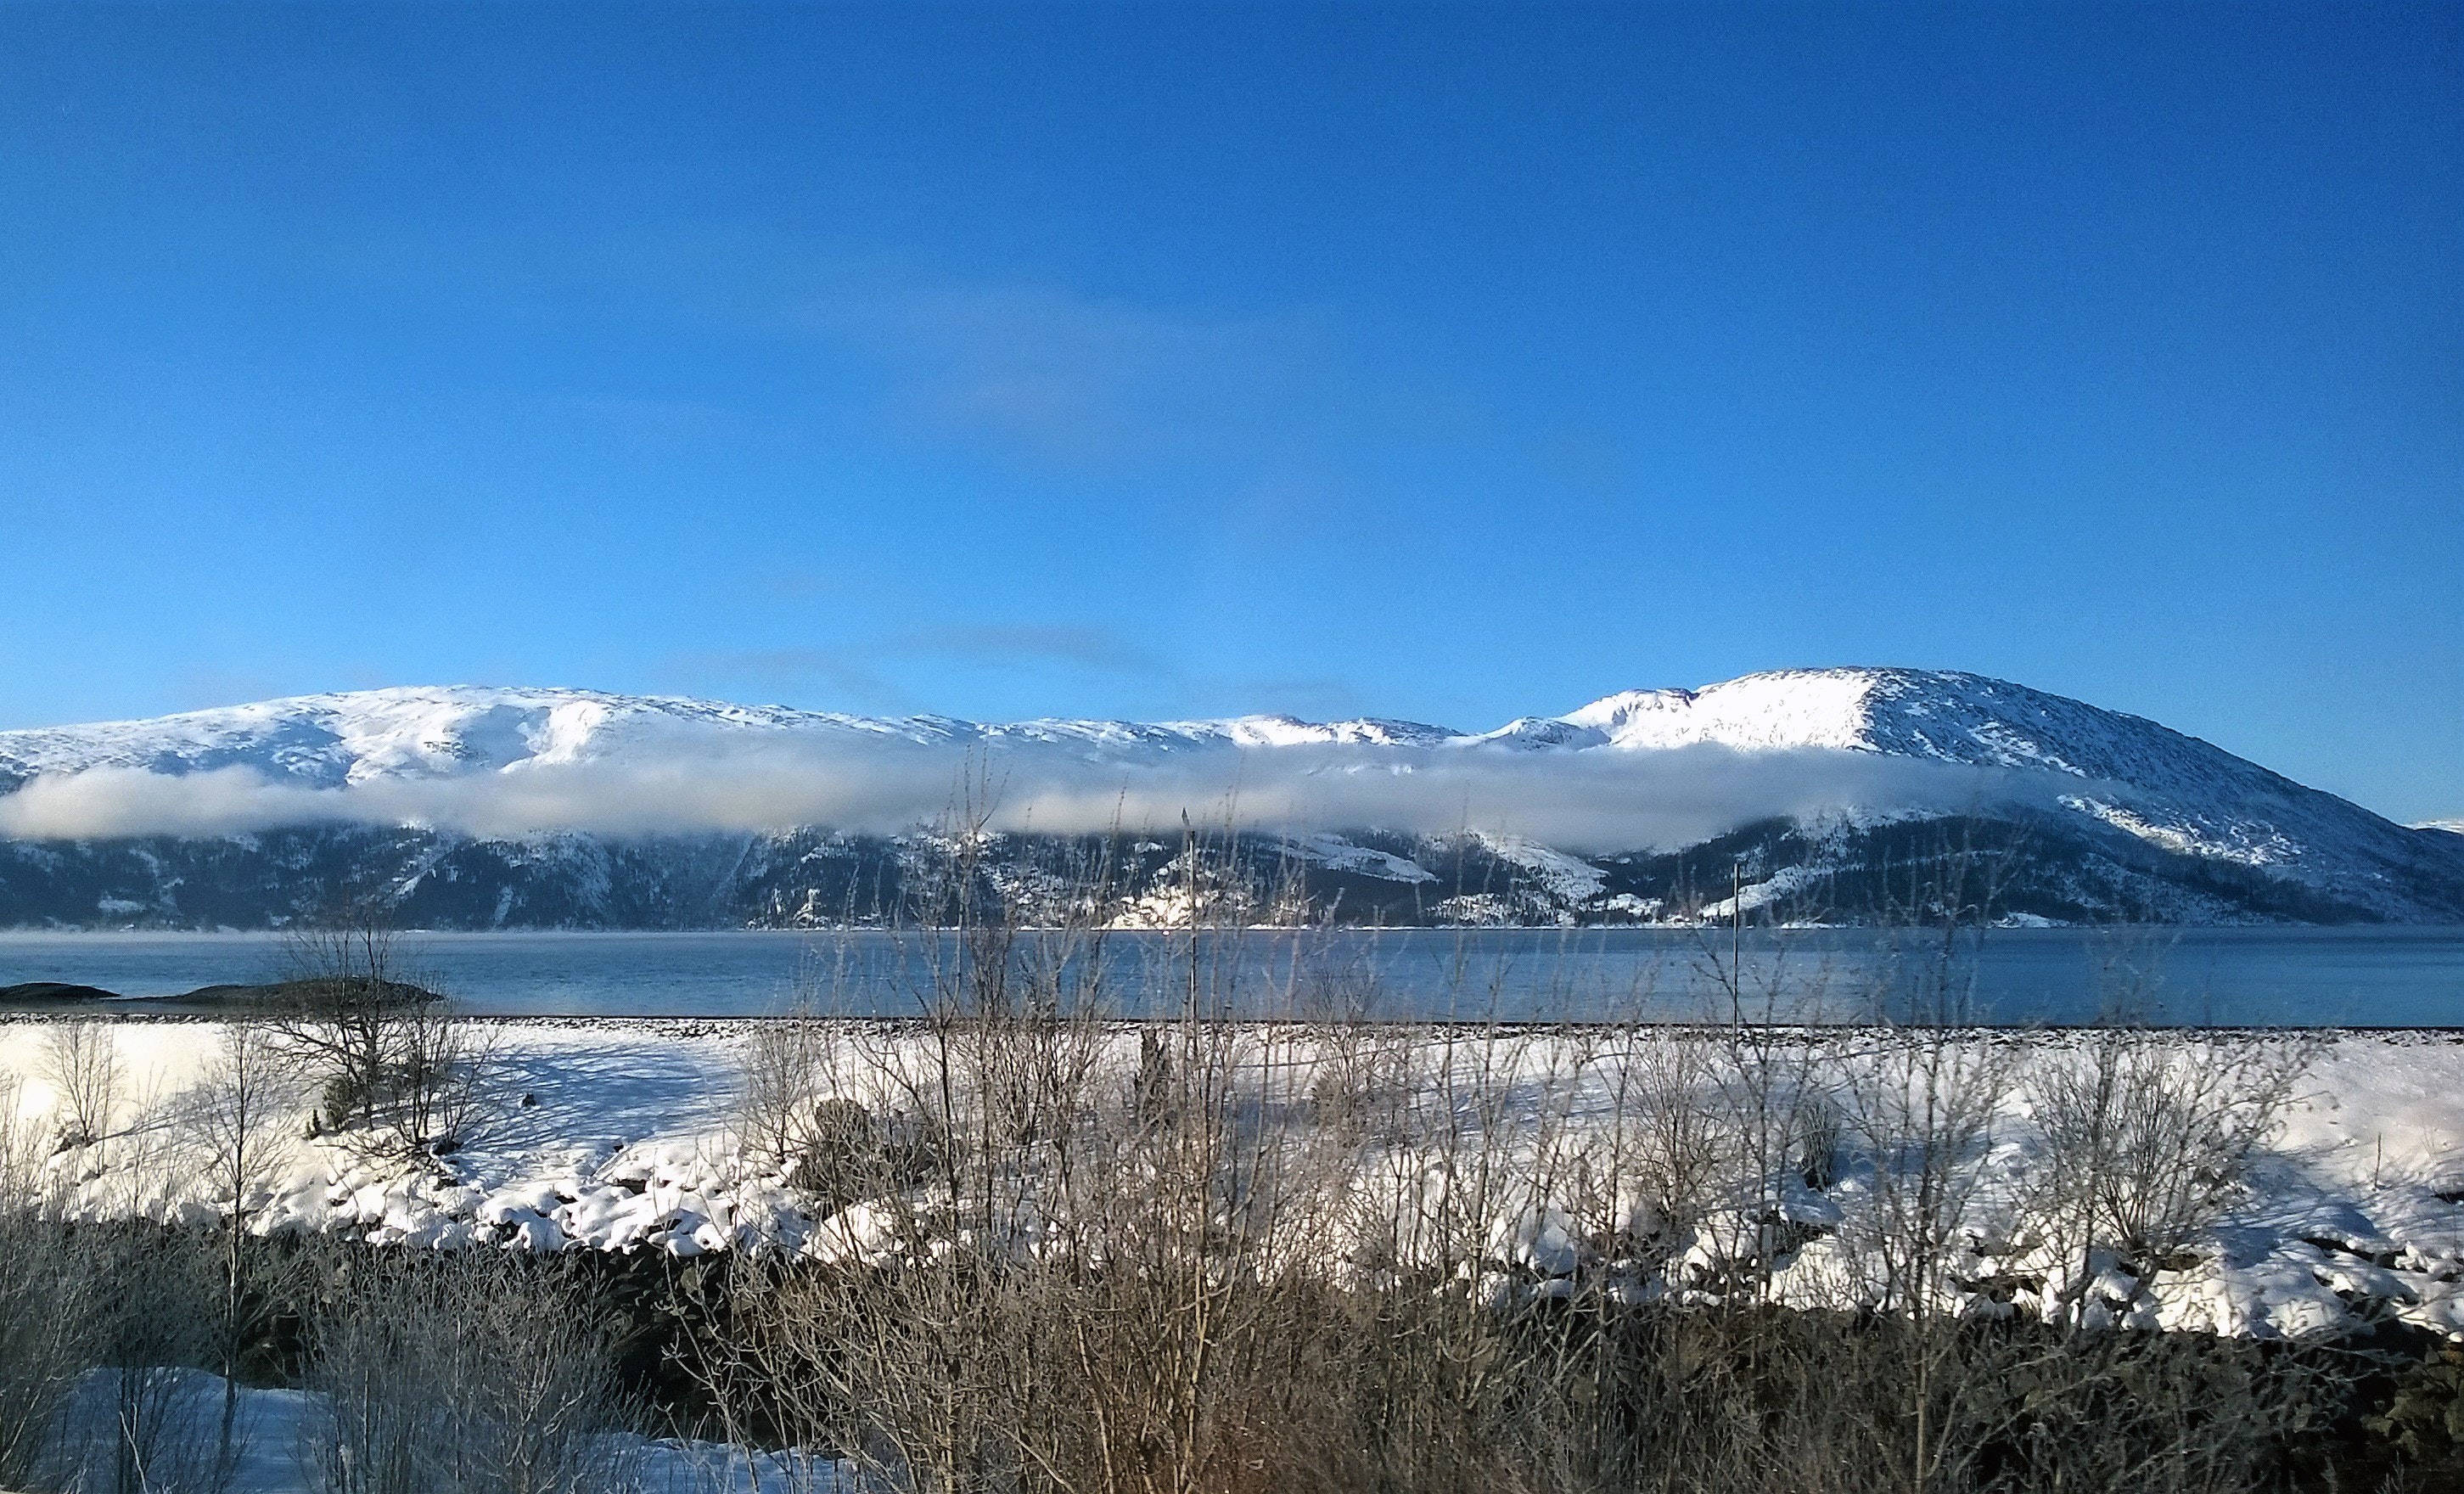 Landscape photo of body of water within snow coated mountain range